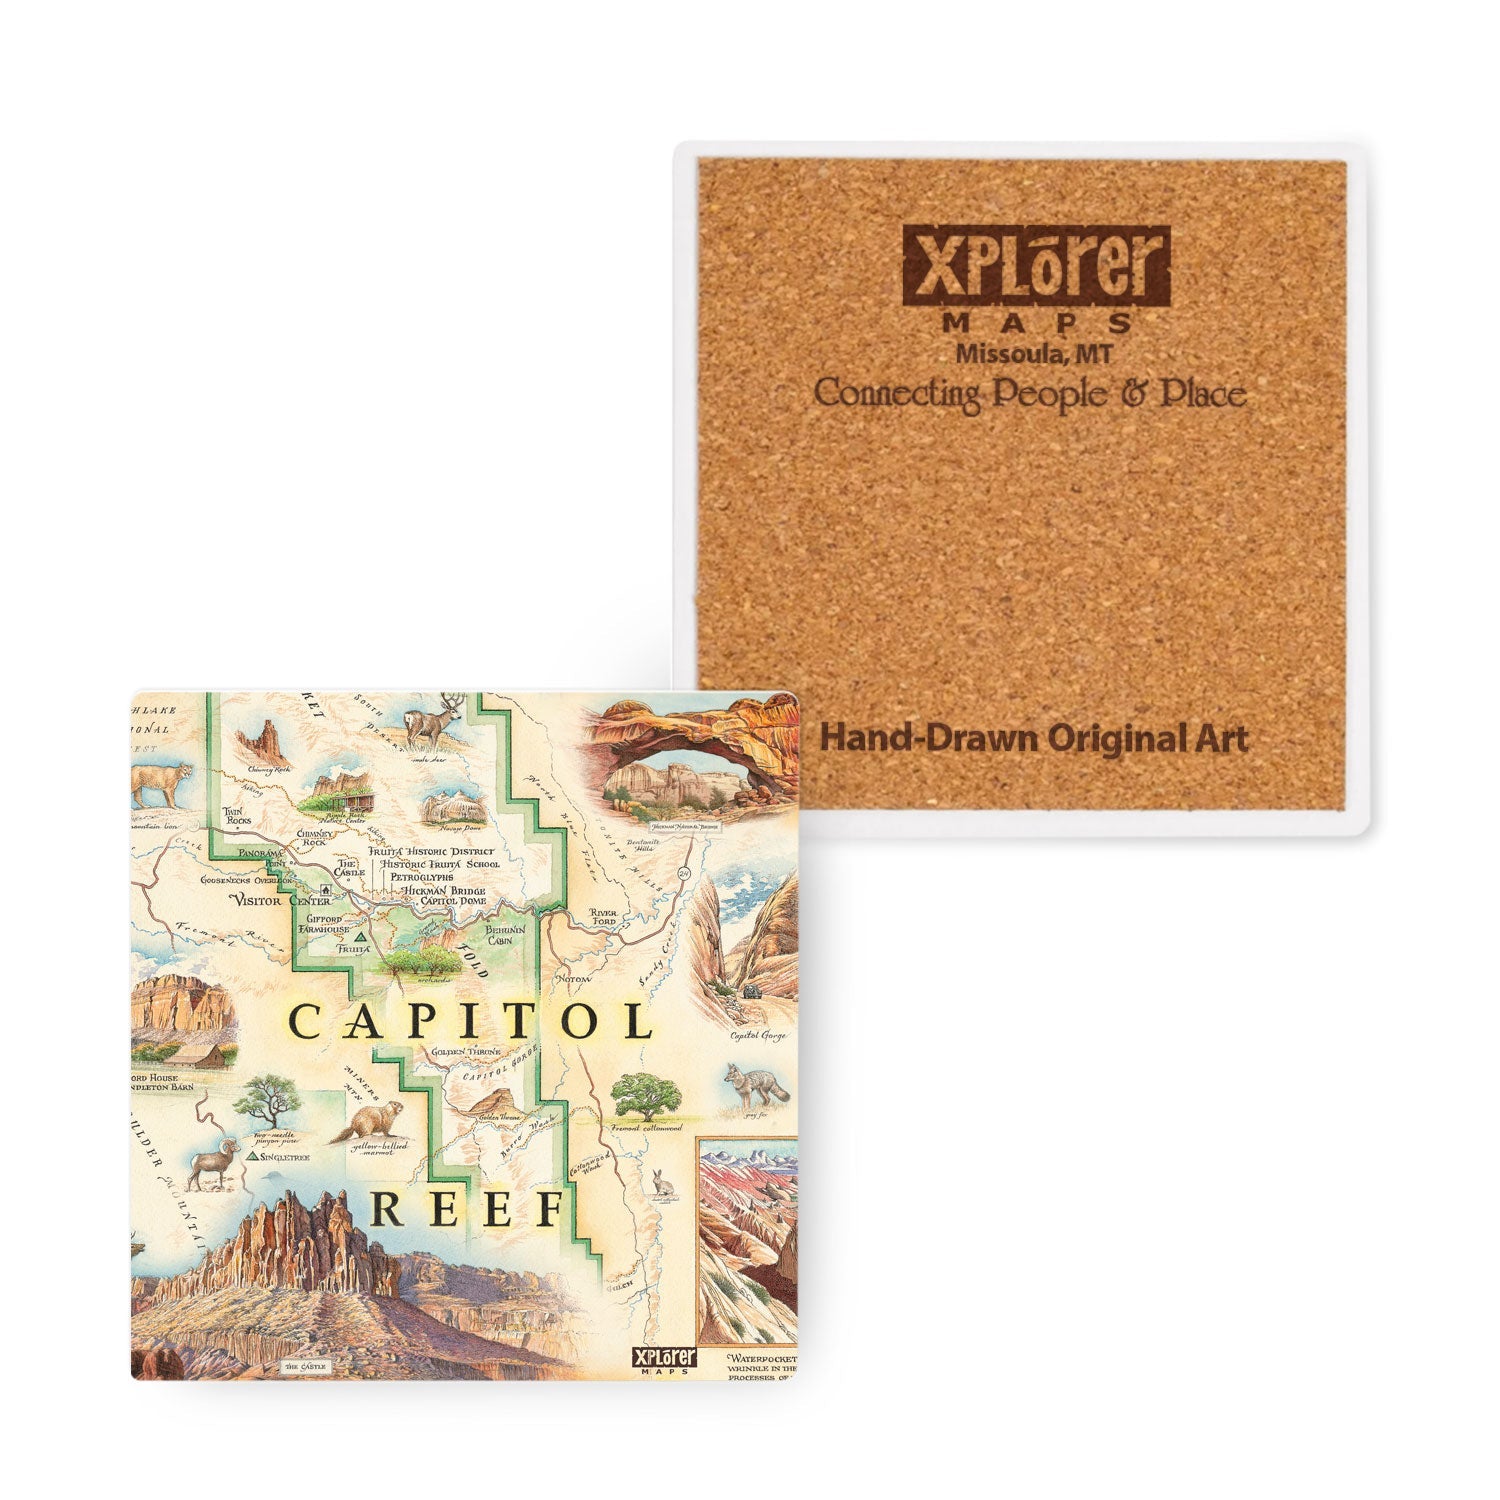 Utah's Capitol Reef National Park ceramic coasters in earth tones. Featuring Claret Cup Cactus, Narrowleaf Yucca, Prince's Plume, and the Two-Needle Pinyon Pine. Detailed depictions of landmarks and geographic wonders like the Lower Muley Twist Canyon, Capitol Gorge, and Hickman Natural Bridge. The coaster measures  4